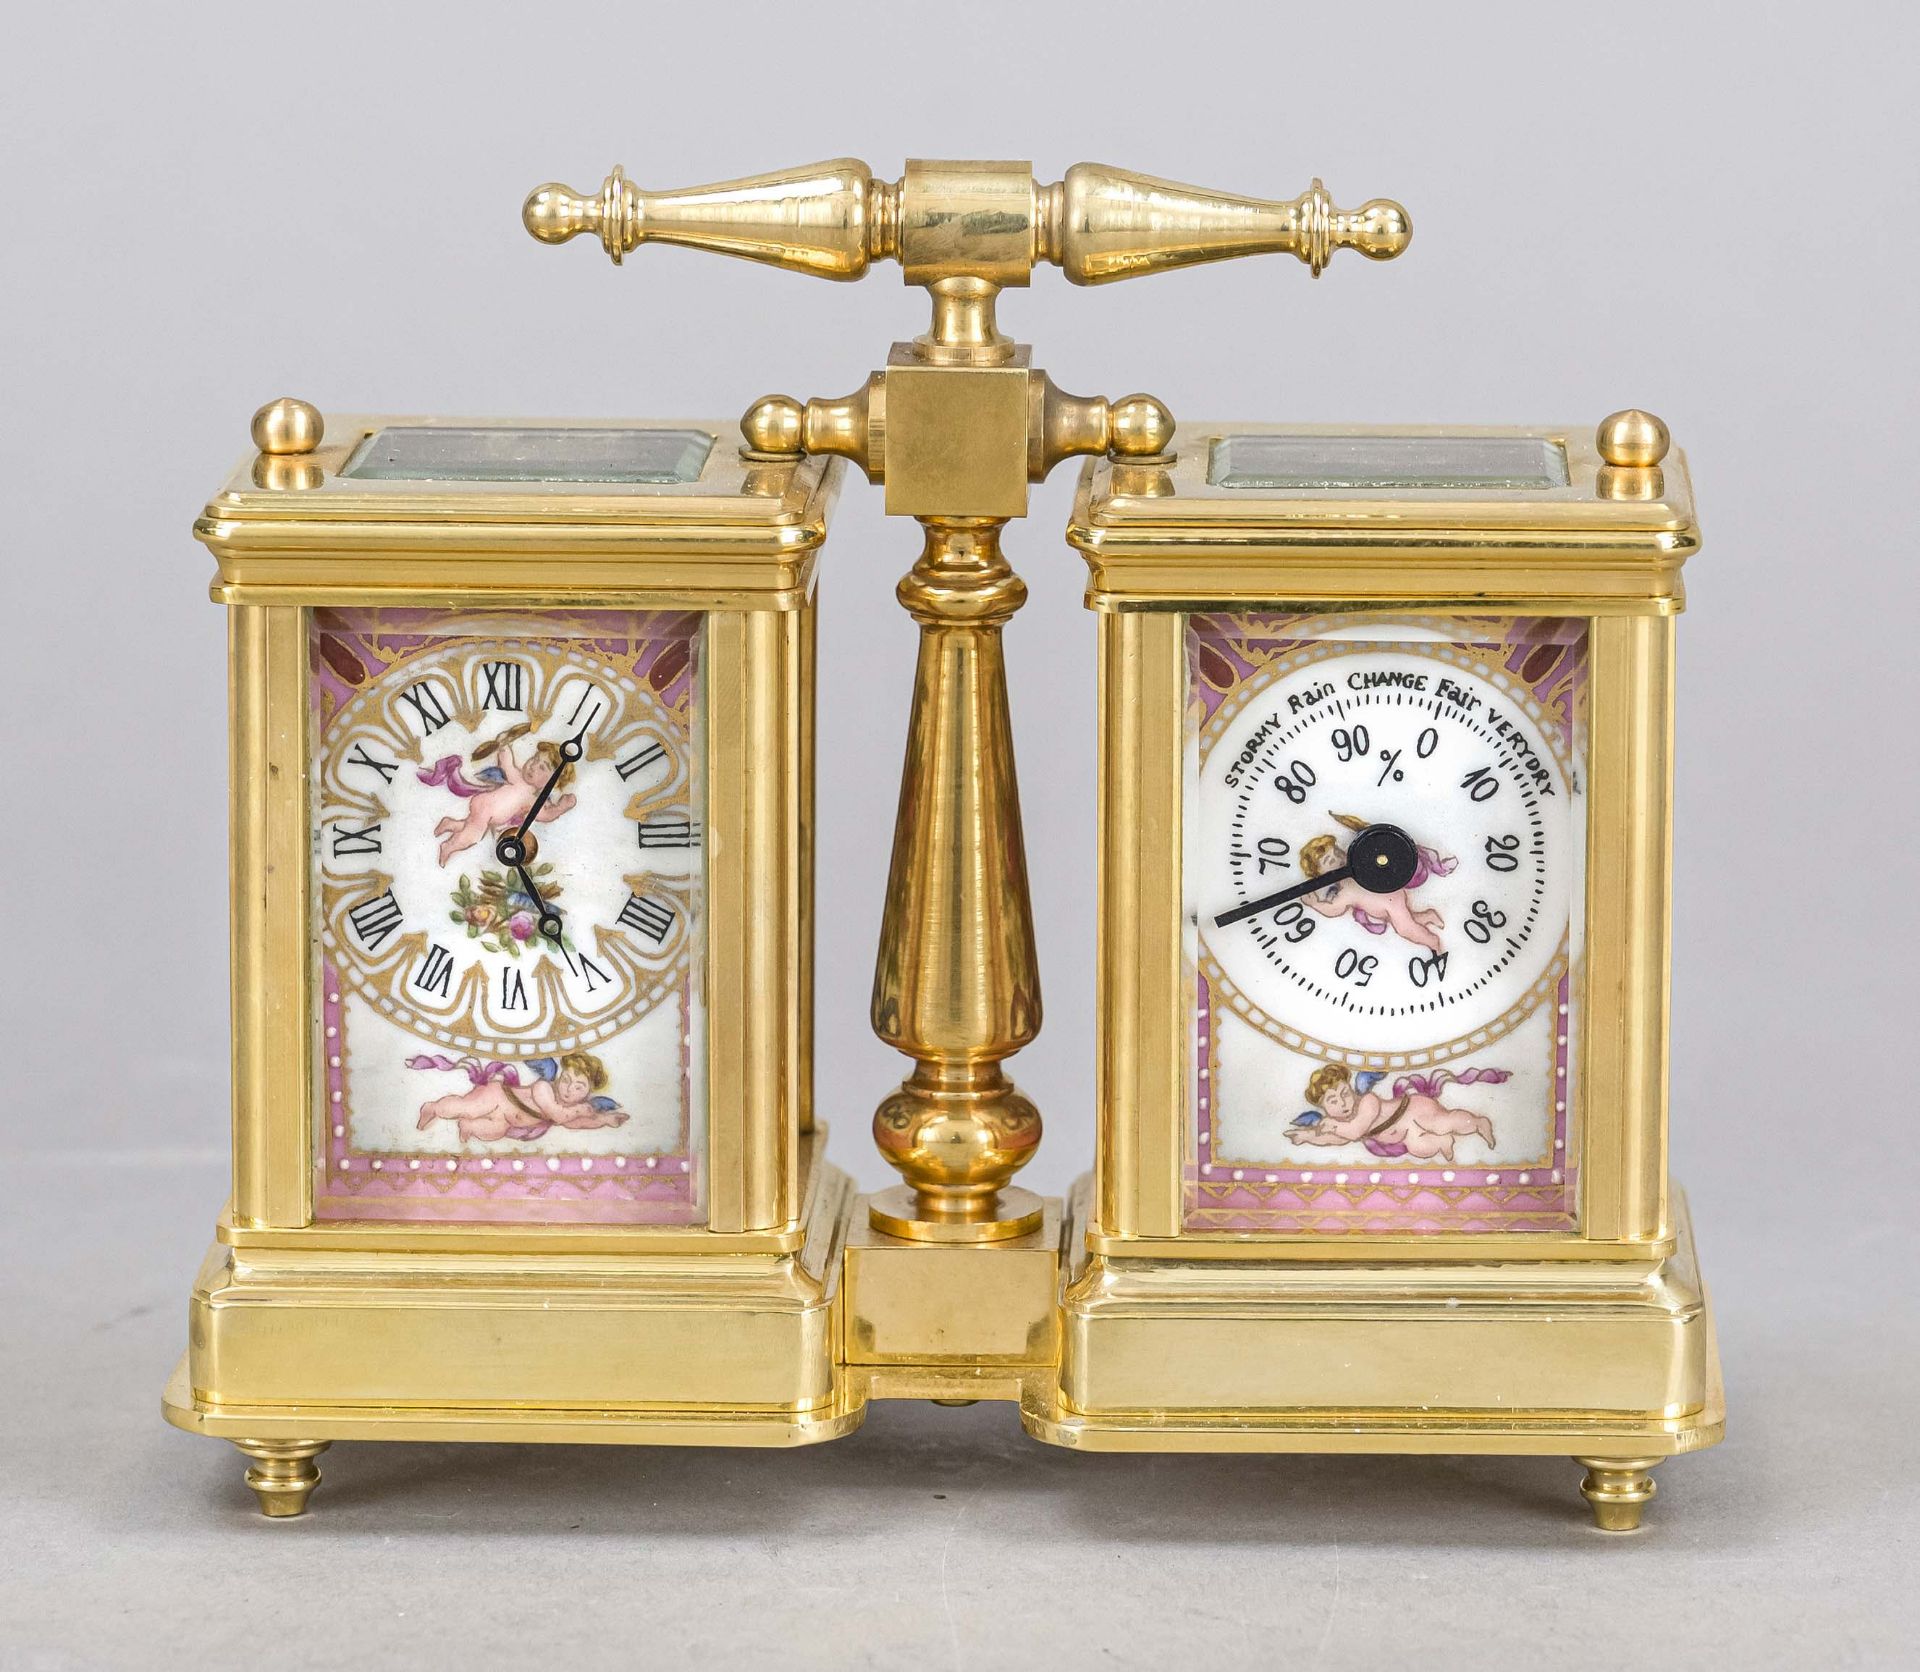 Travel alarm clock and barometer, 2nd half 20th century, gilt brass with top mounted handle, faceted